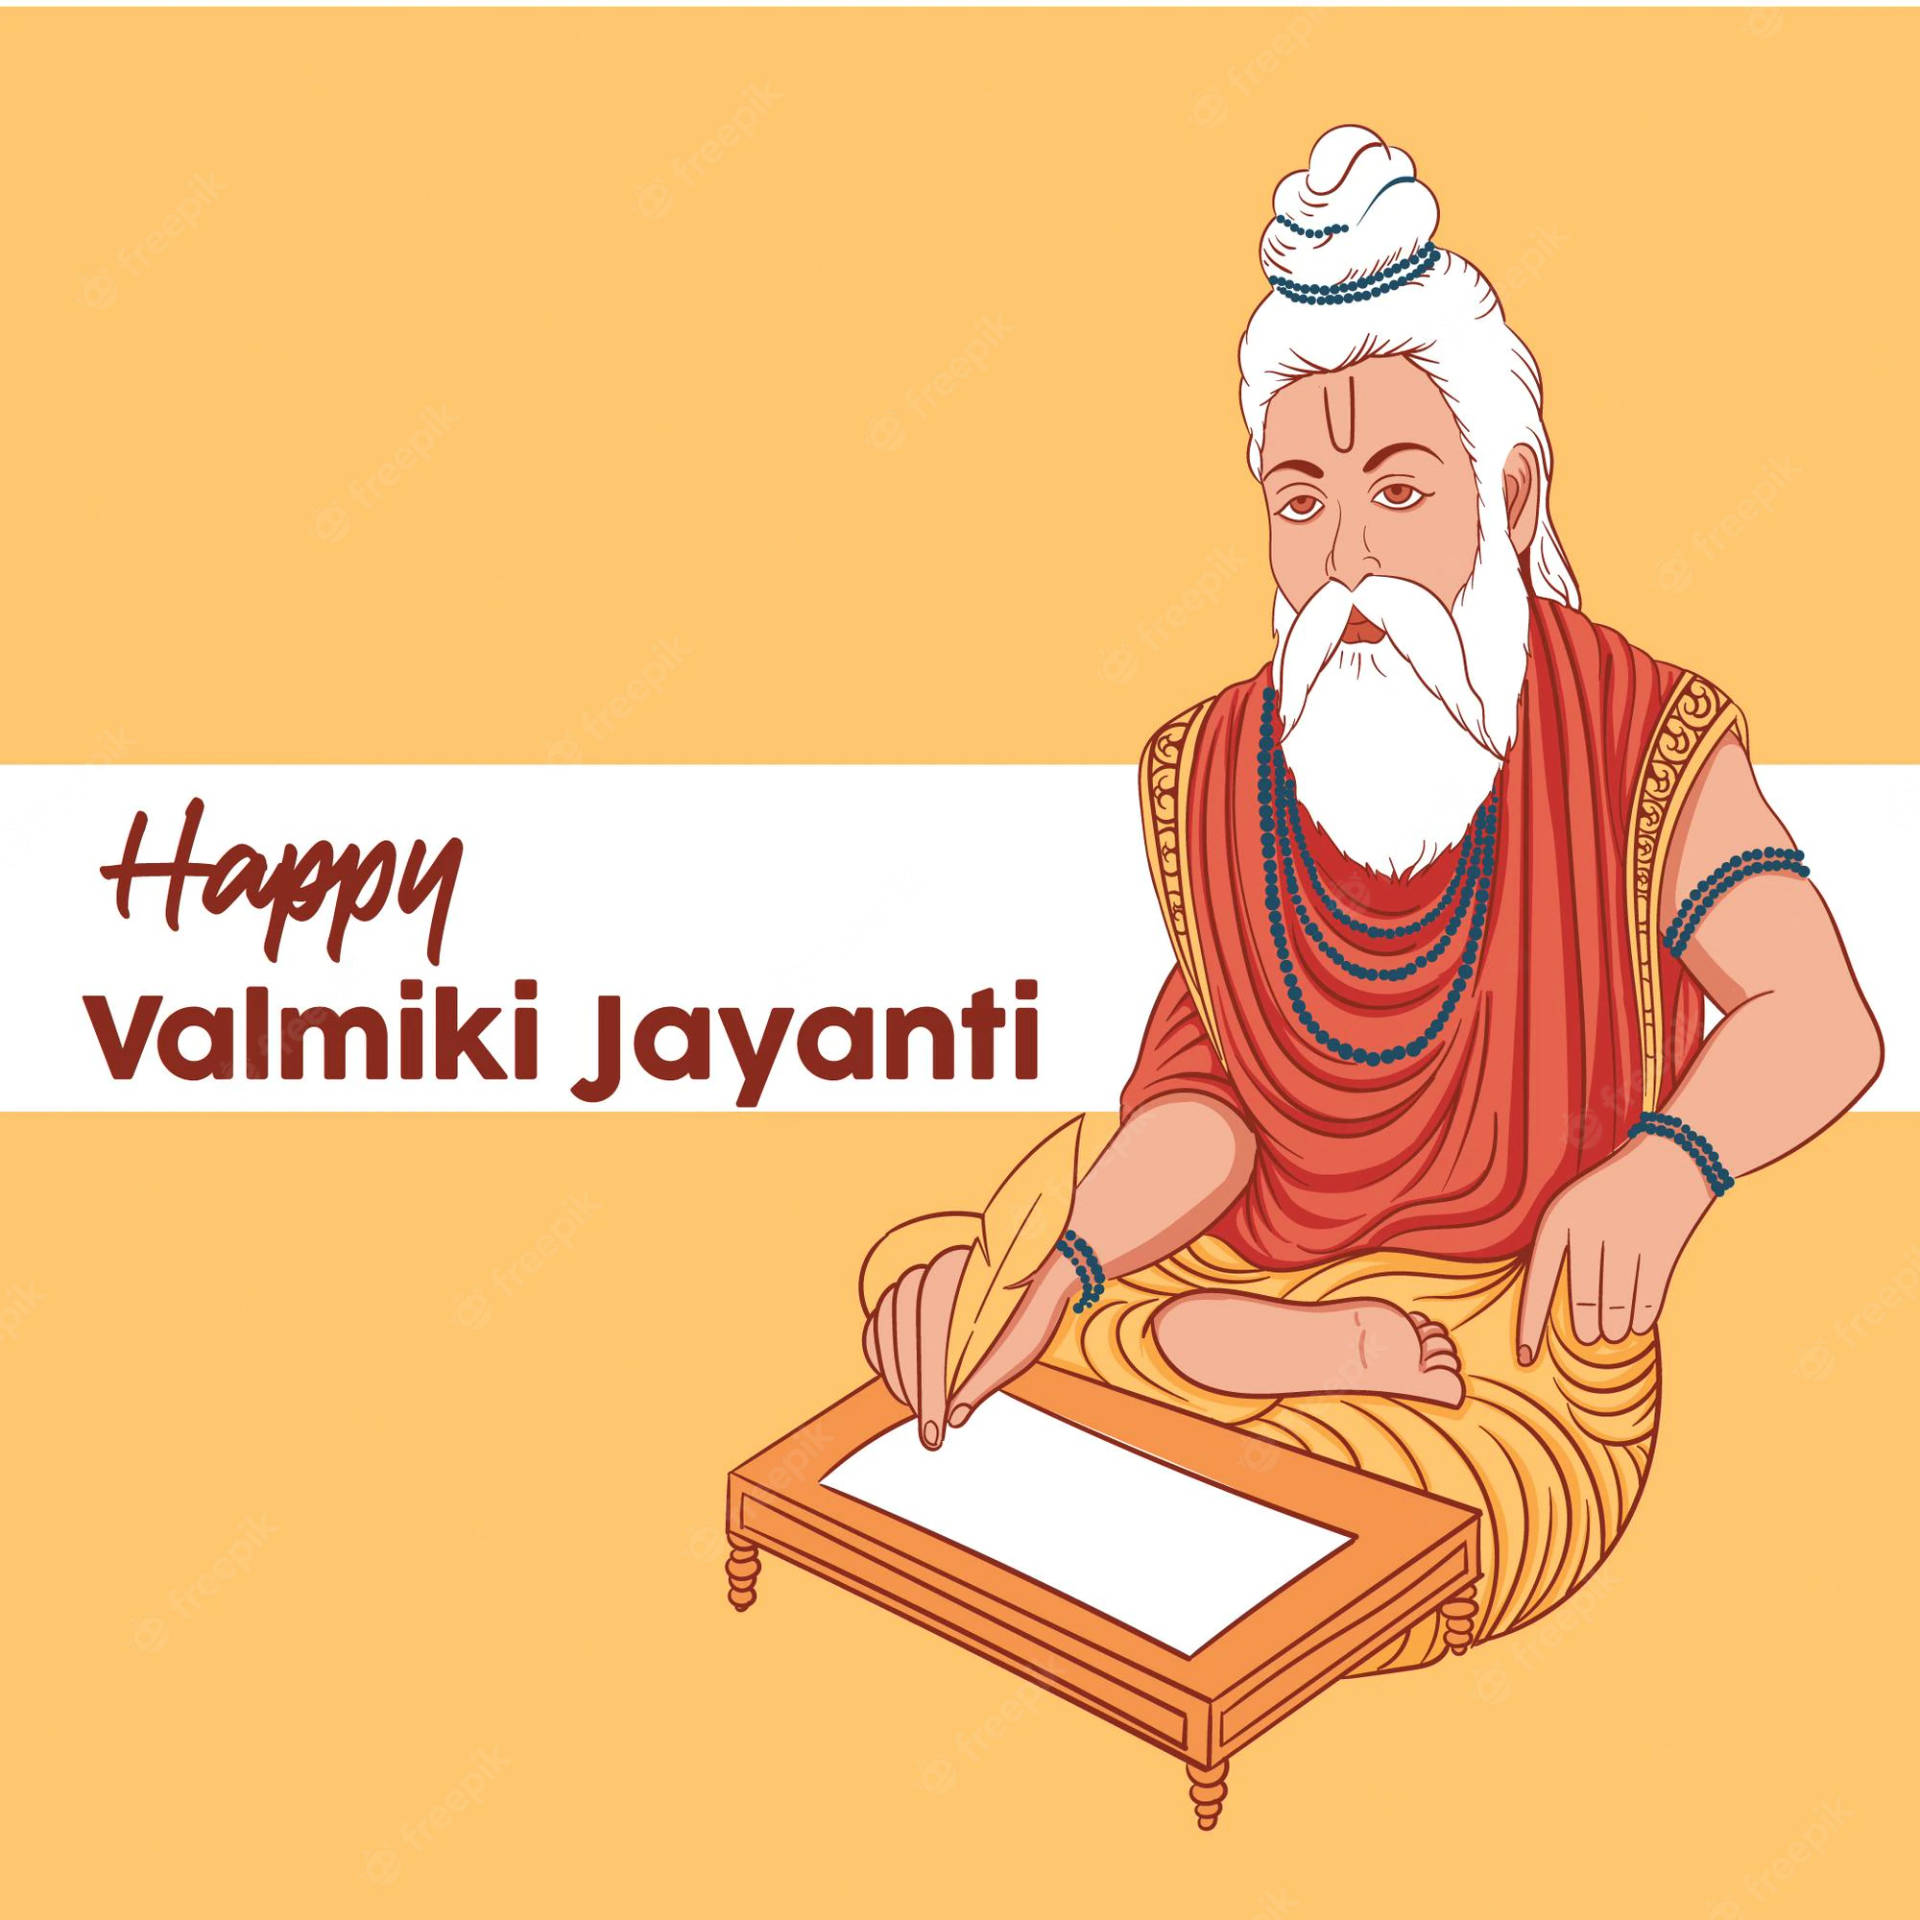 Happy Valmiki Jayanti With Wooden Board Wallpaper